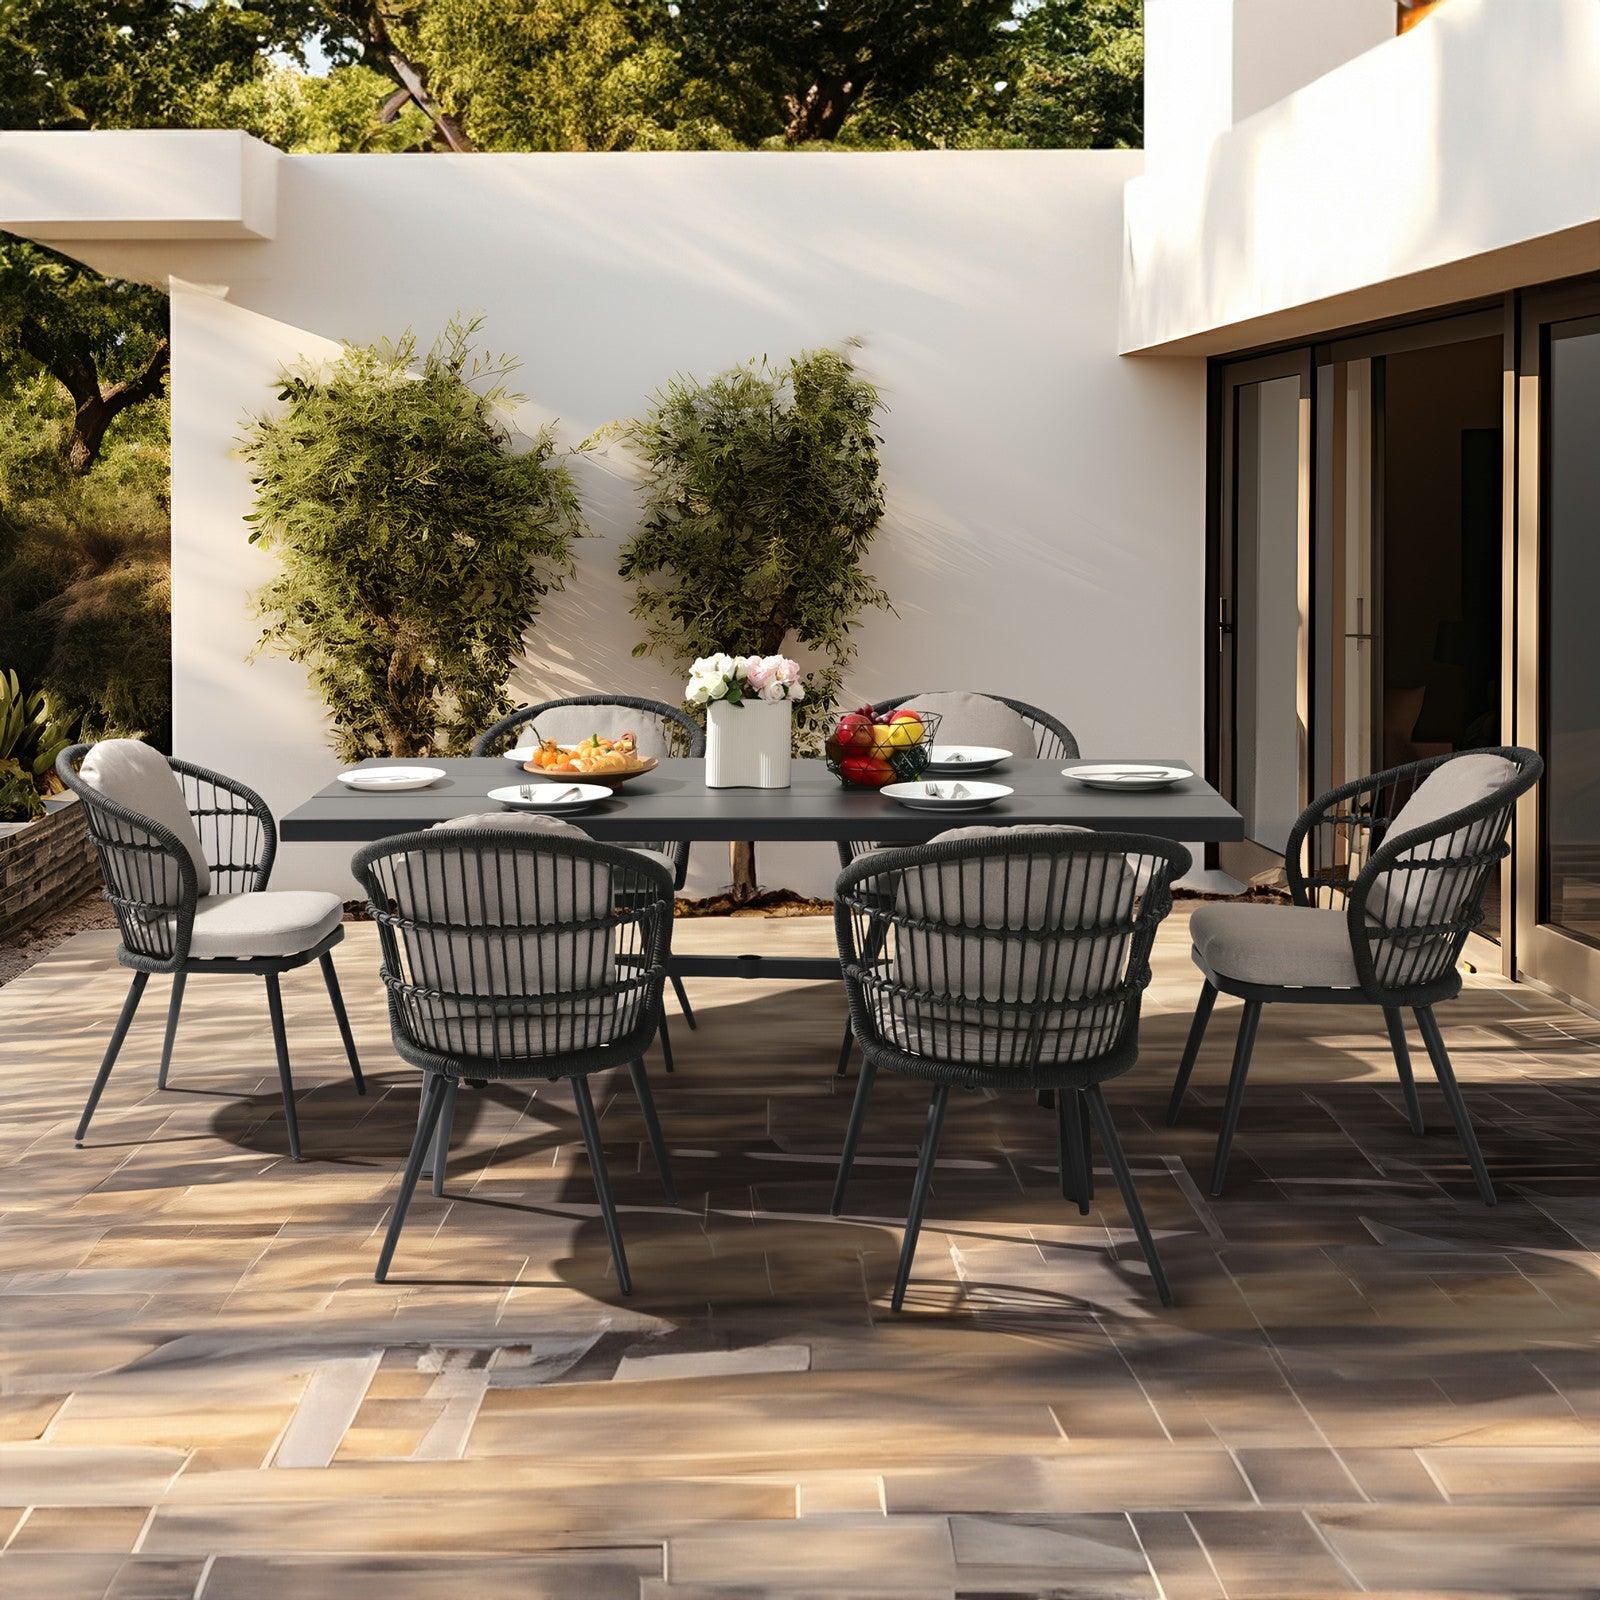 Comino dark grey aluminum outdoor Dining Set for 6 with light grey cushions, 6 dining chairs with backrest rope design, 1 rectangle aluminum dining table with x-shaped legs - Jardina Furniture#Pieces_7-pc.